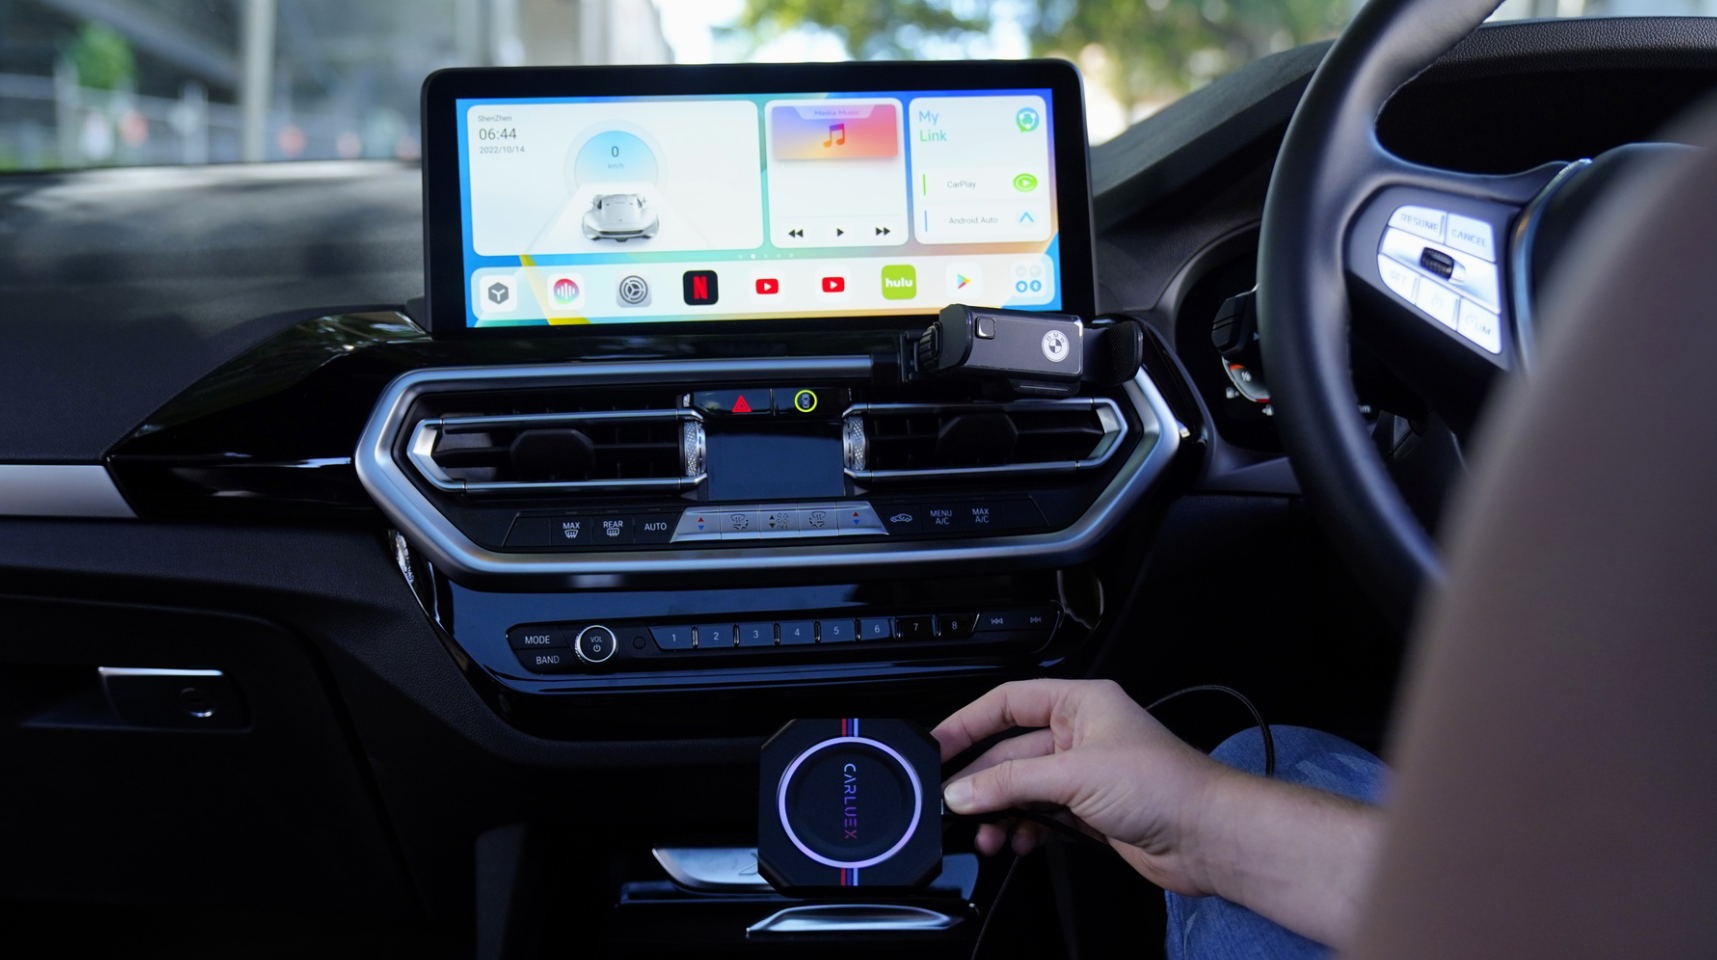 https://s1.cdn.autoevolution.com/images/news/this-device-brings-full-android-to-your-wired-carplay-and-android-auto-car-213434_1.jpeg